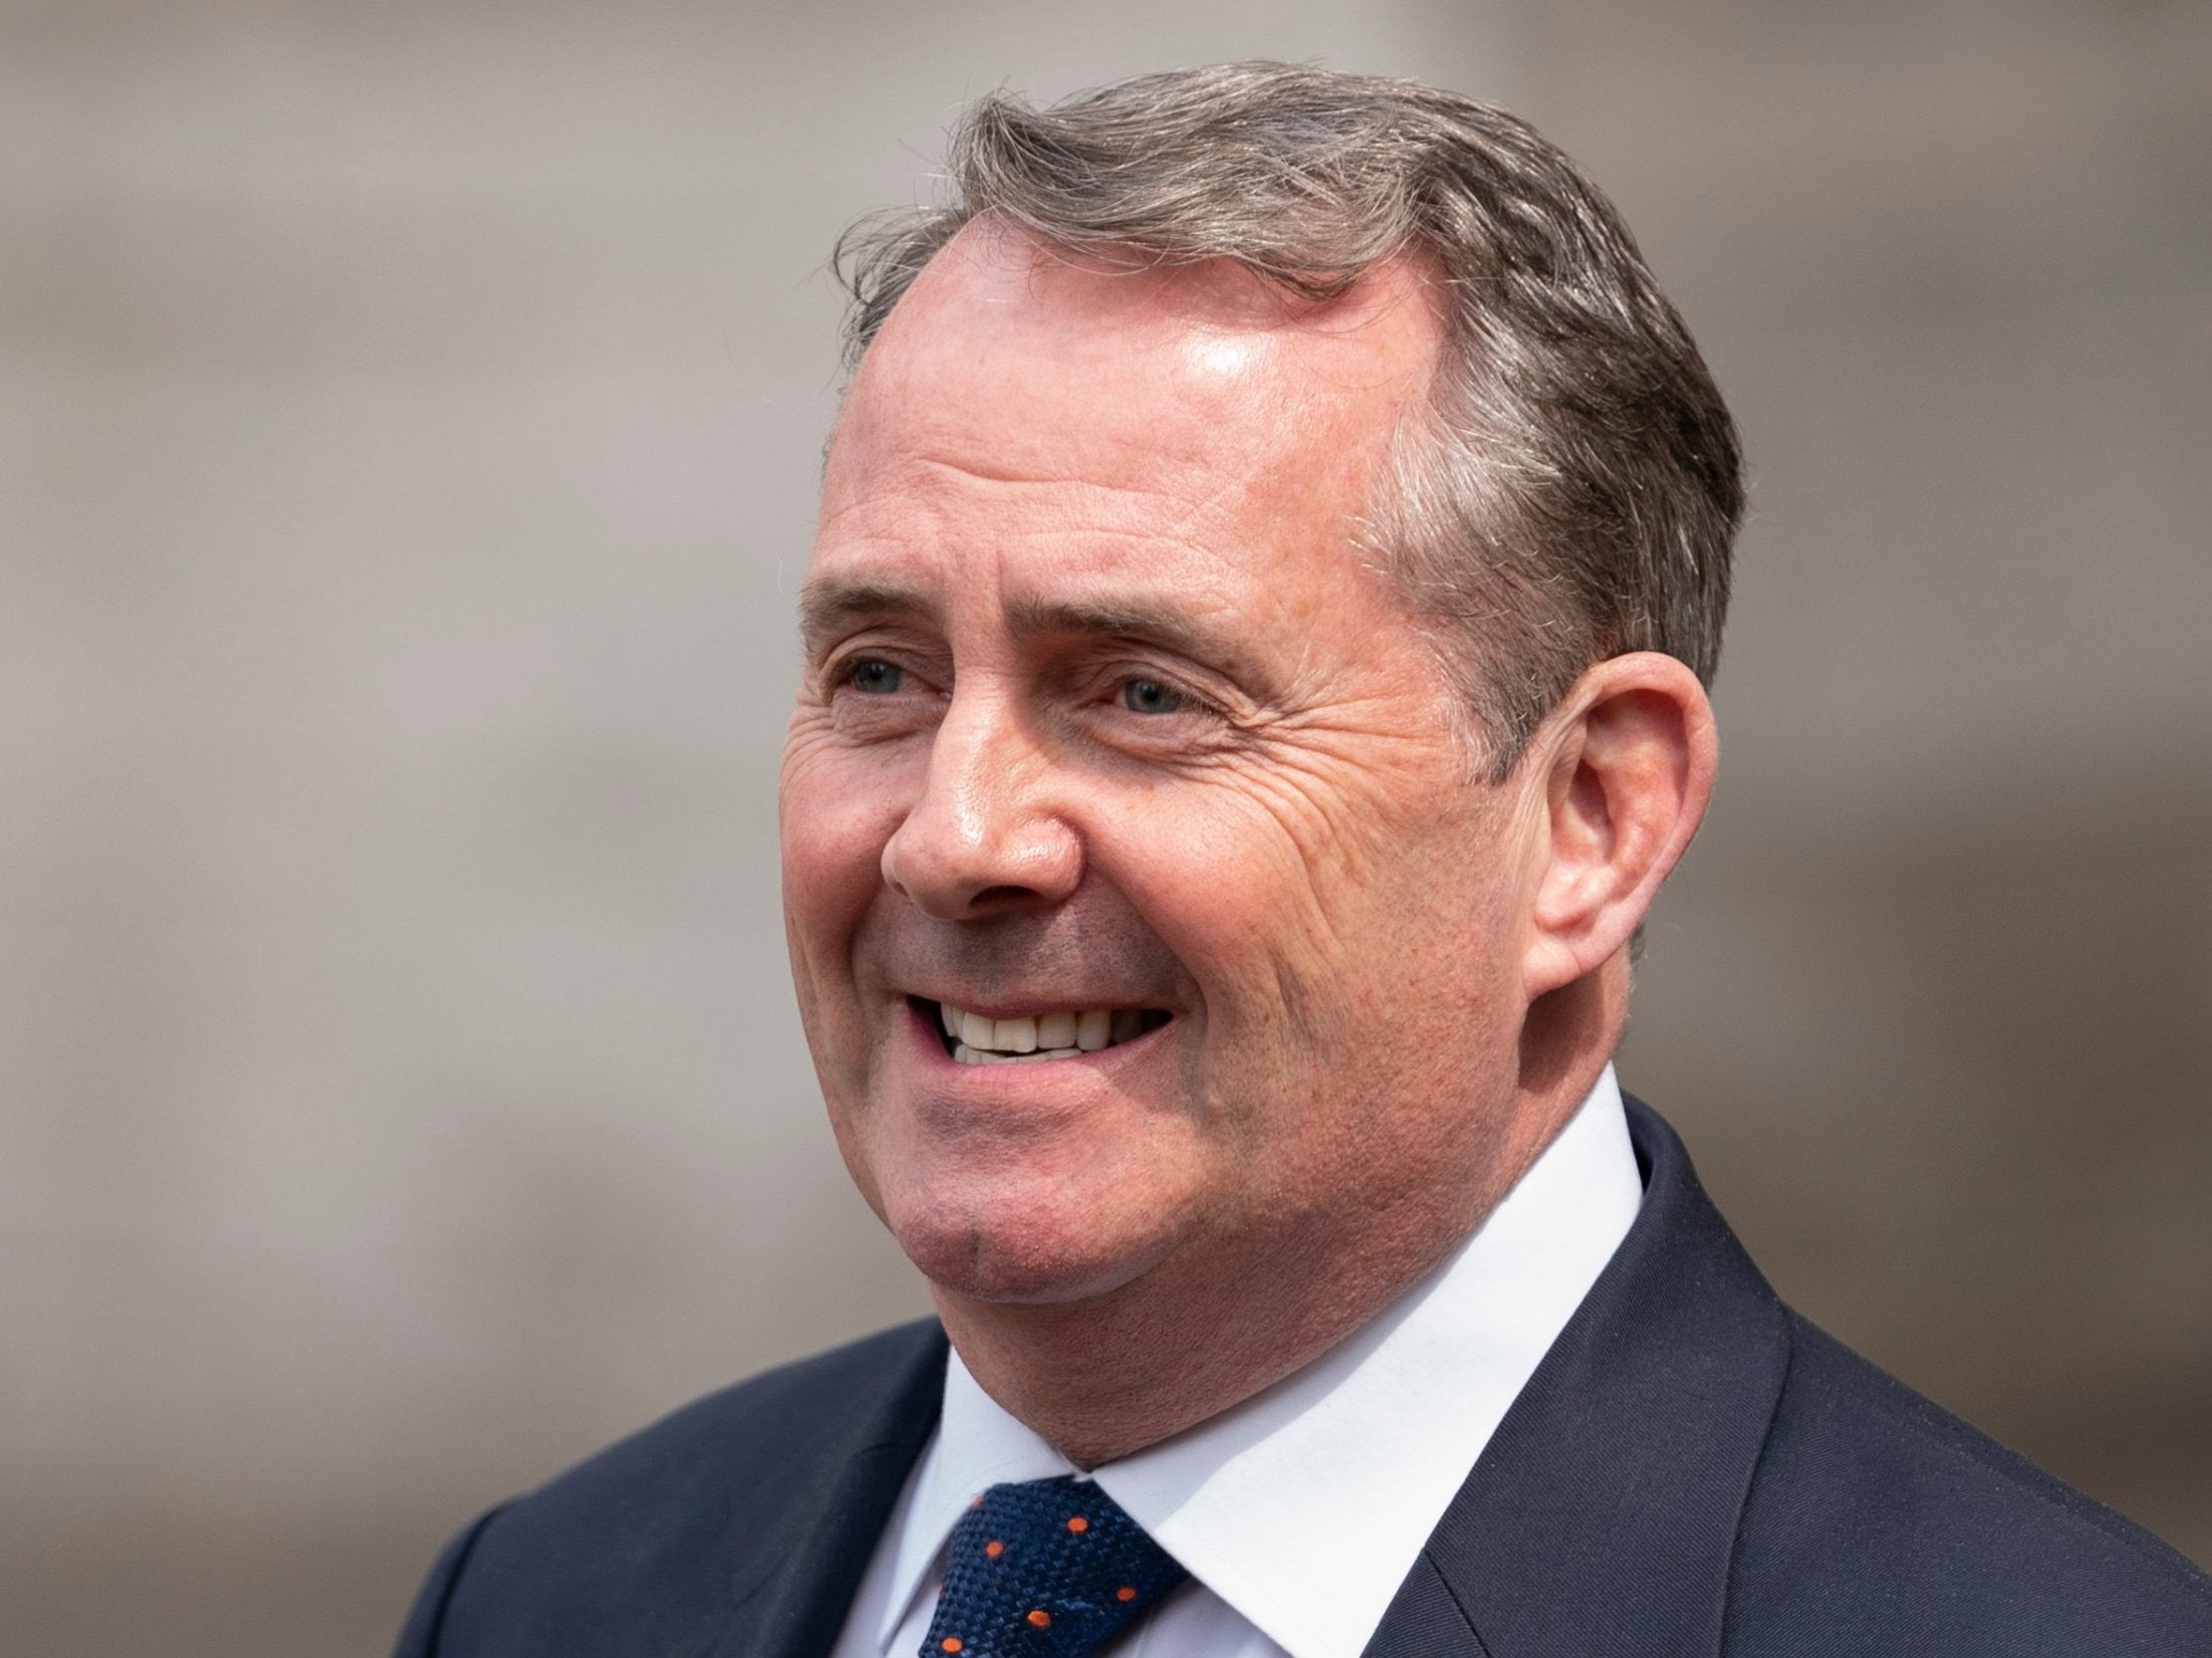 Brexit: Liam Fox claims UK could accept chlorinated chicken in US trade deal without lowering food standards